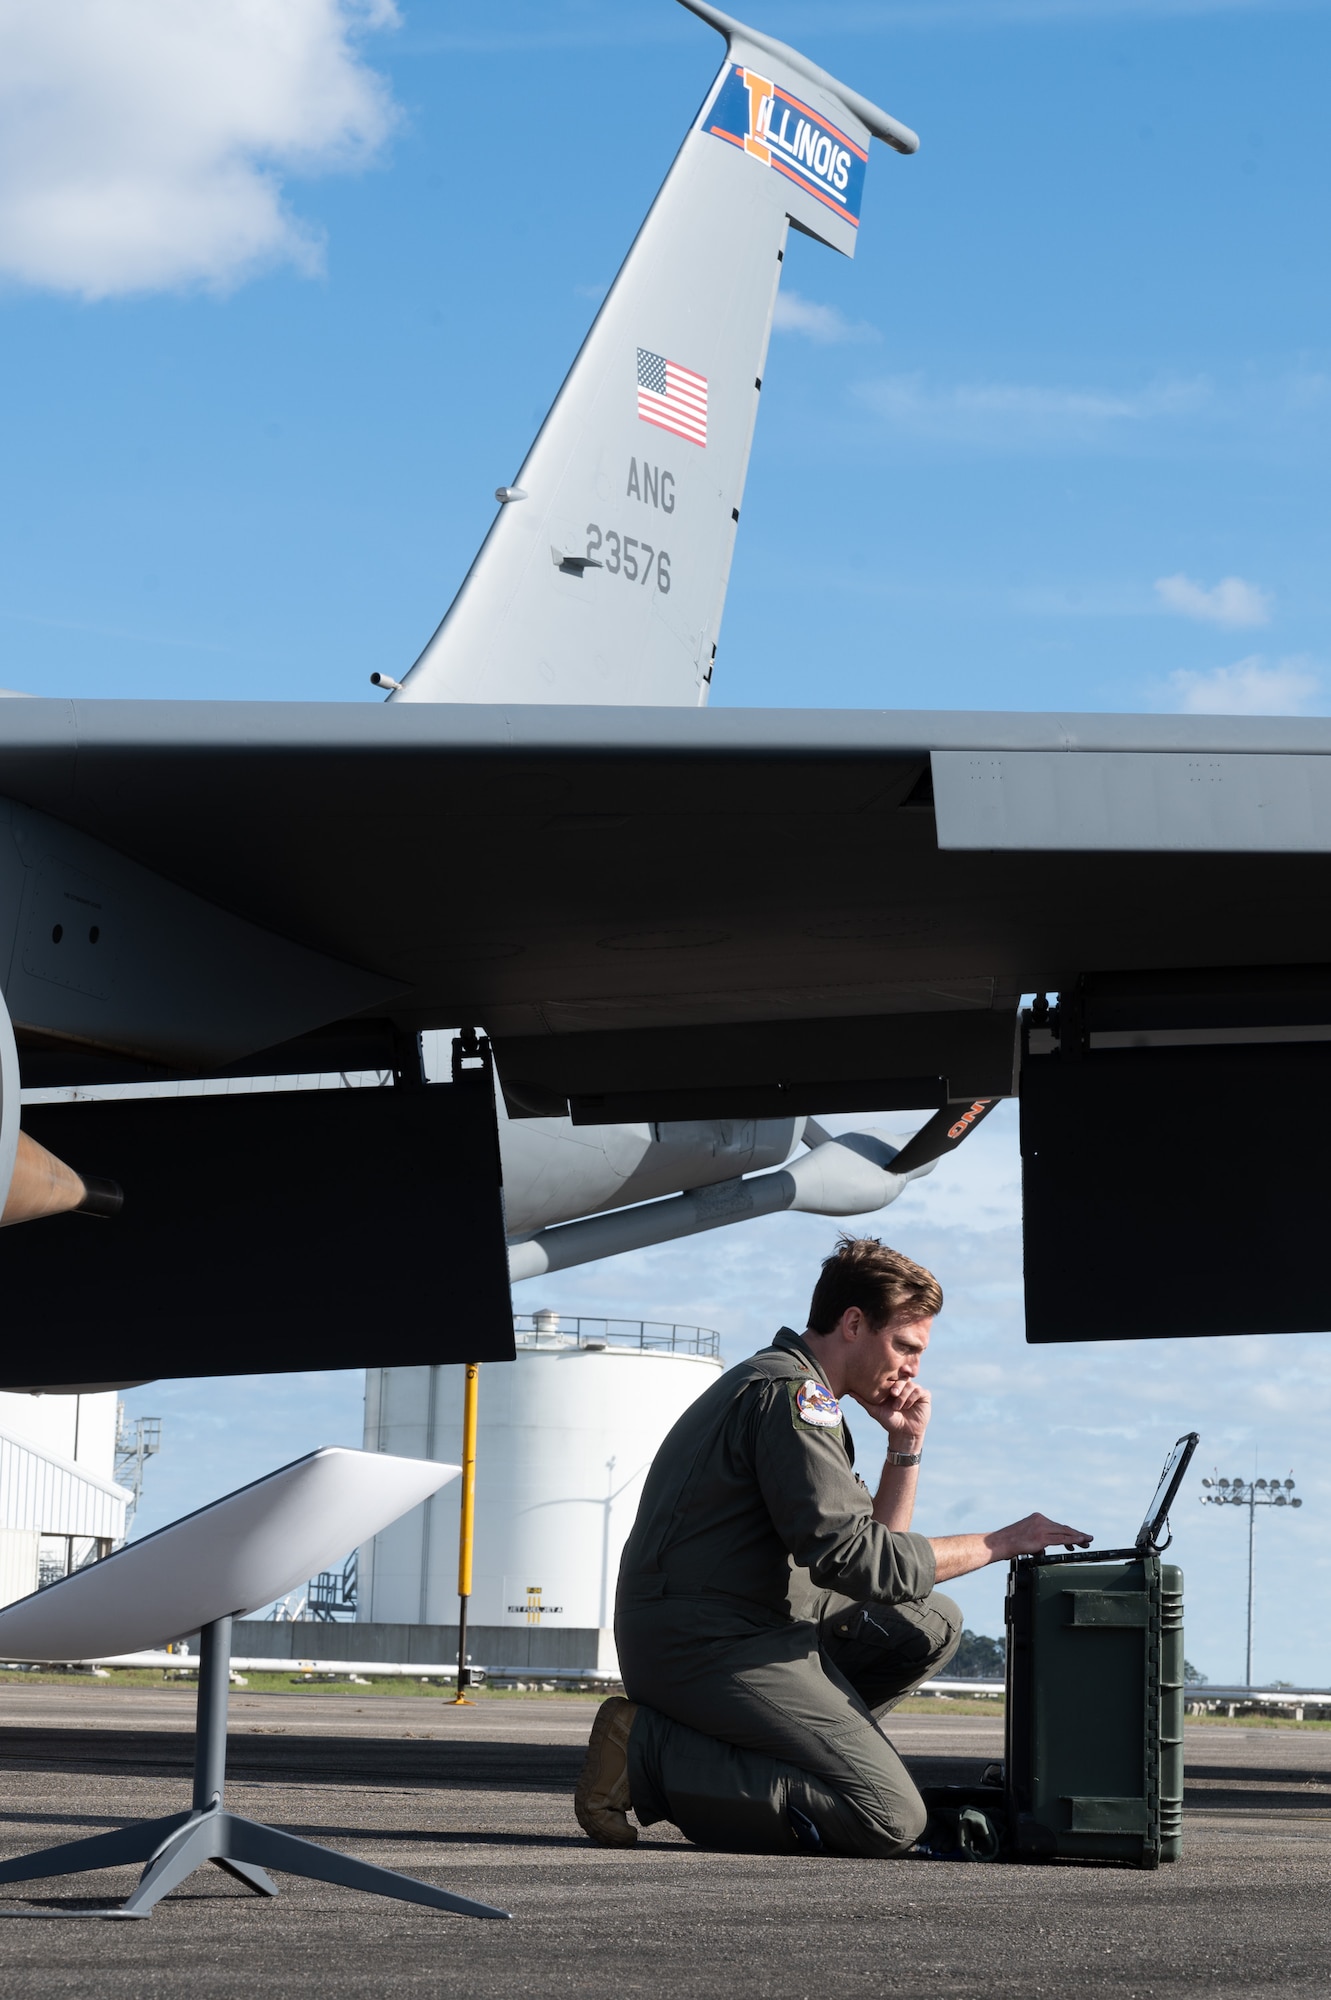 A U.S. Air Force pilot kneels down to type on a laptop that is wirelessly connected to a small satellite dish nearby. A KC-135 tail section is in the background.